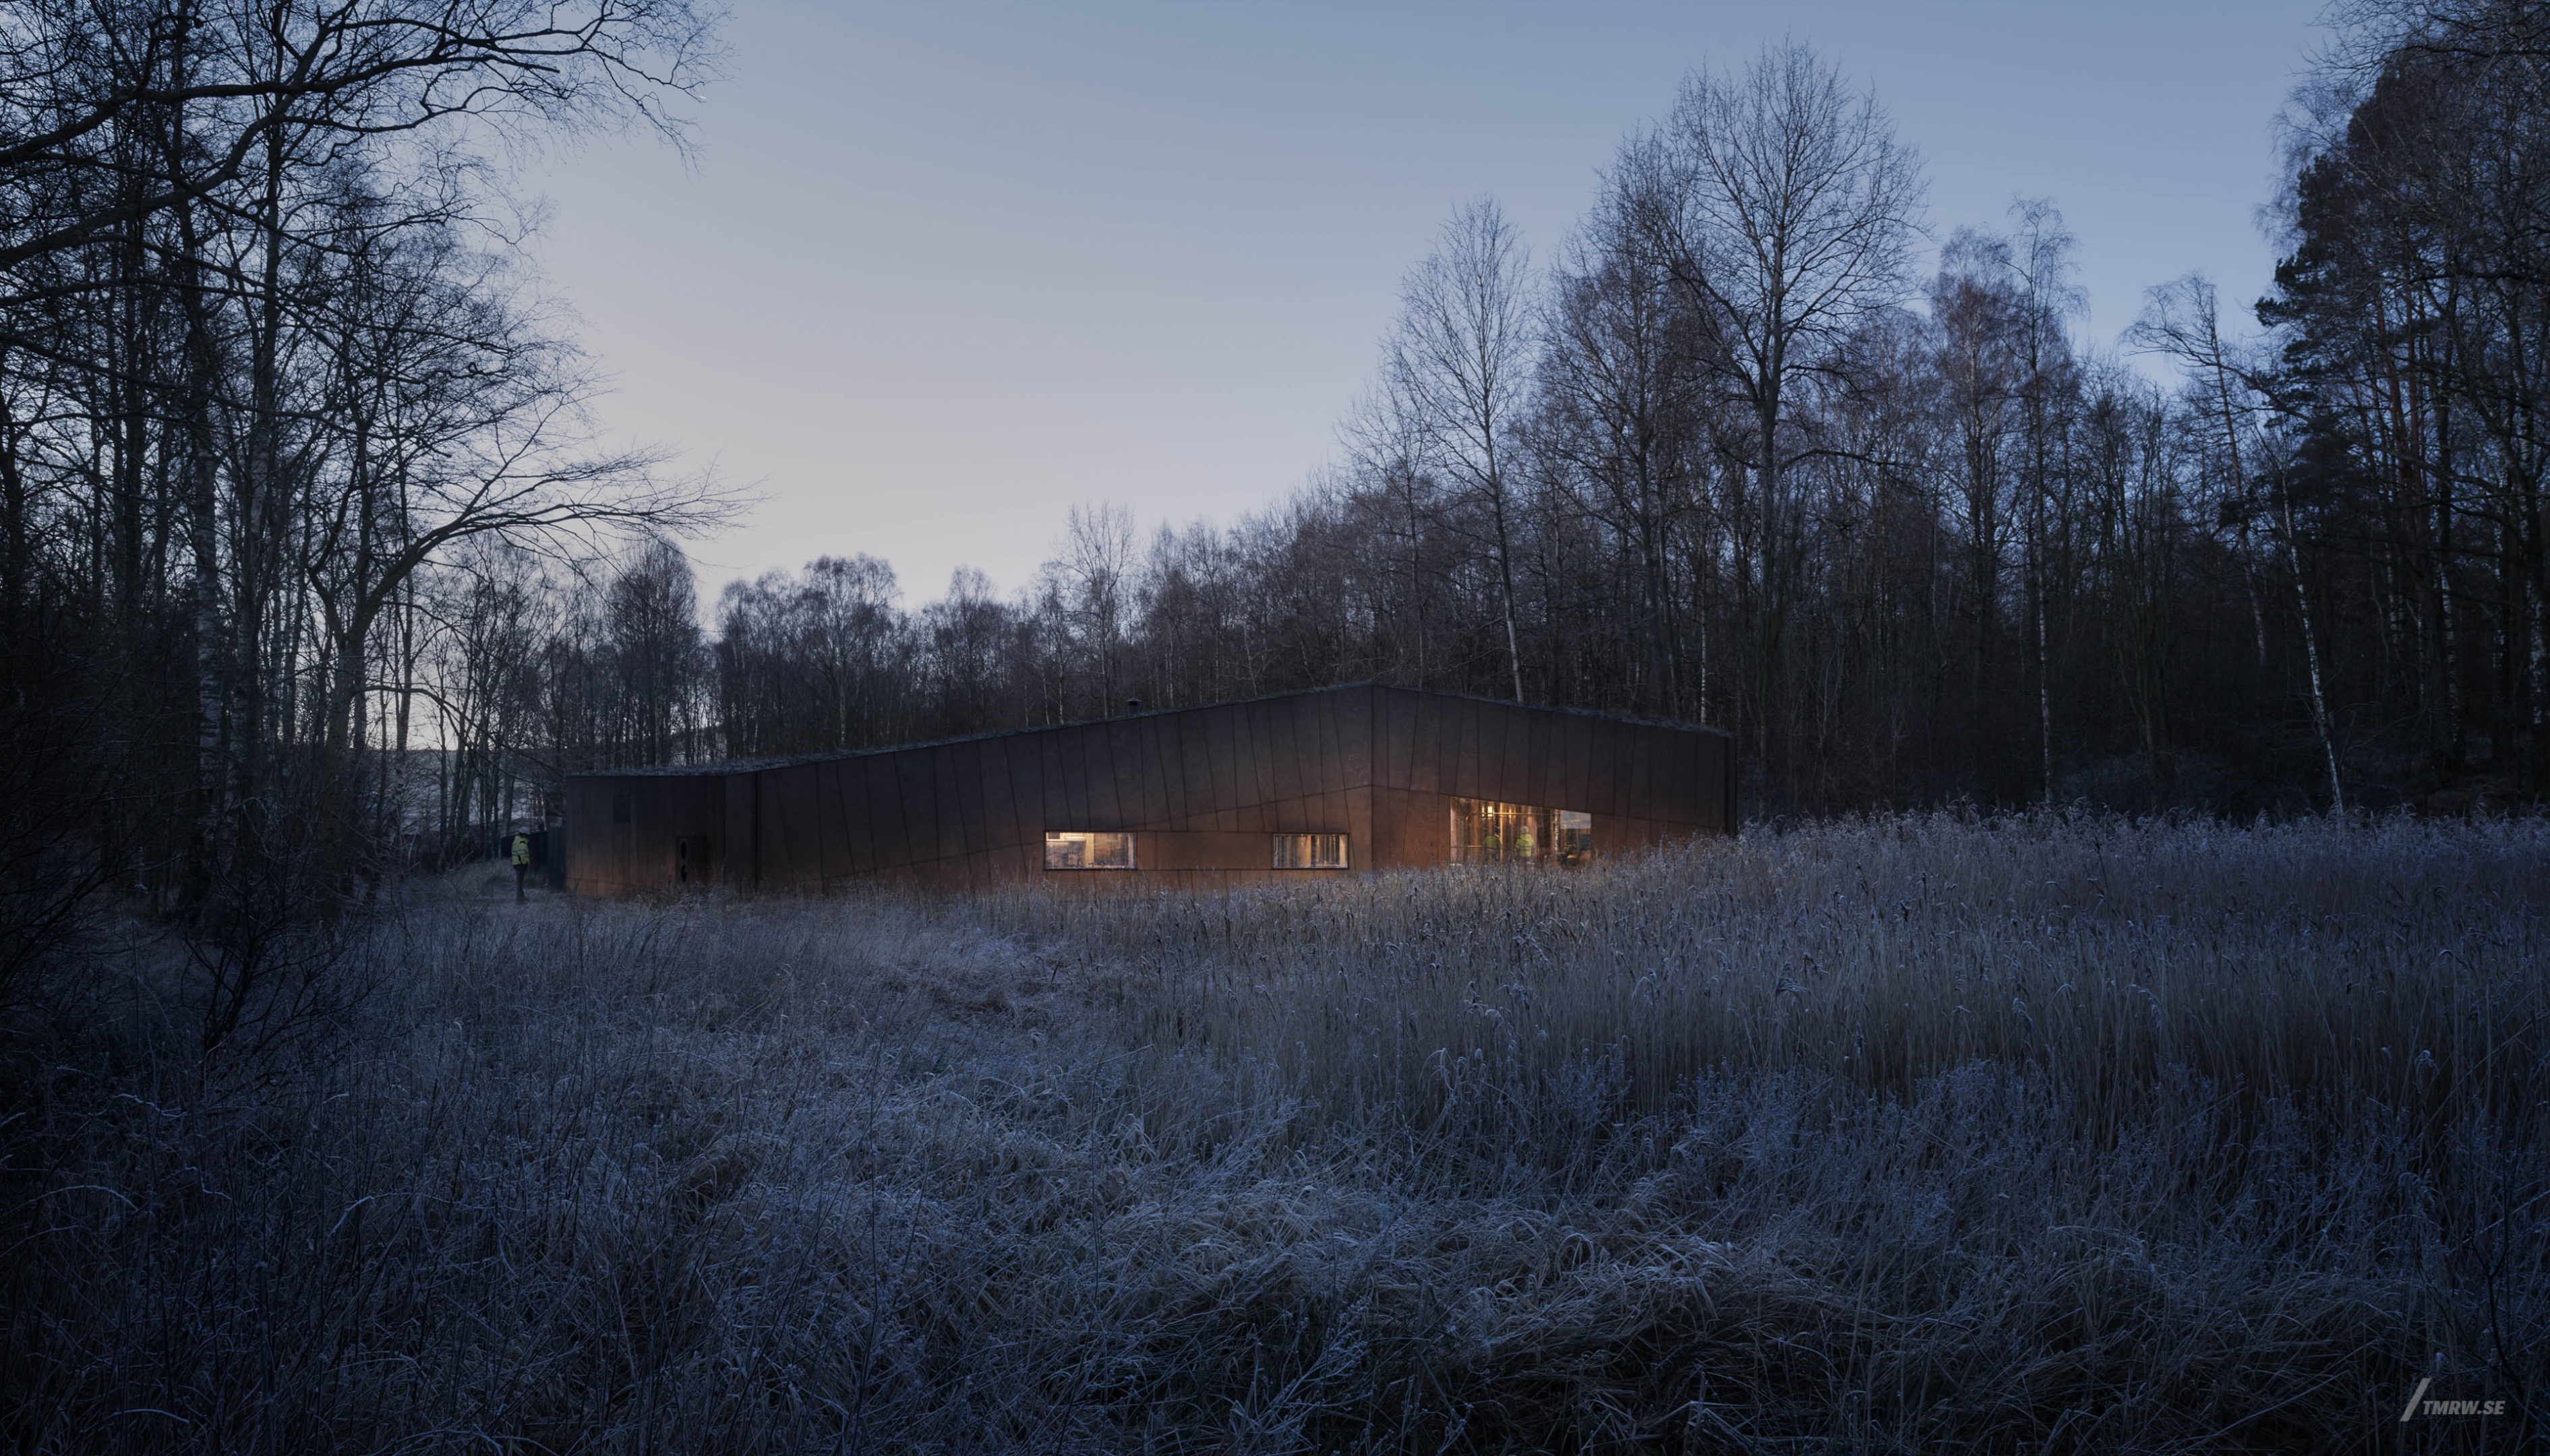 Architectural visualization of Brudarmossen for Kub, exterior of a building at night, winter landscape